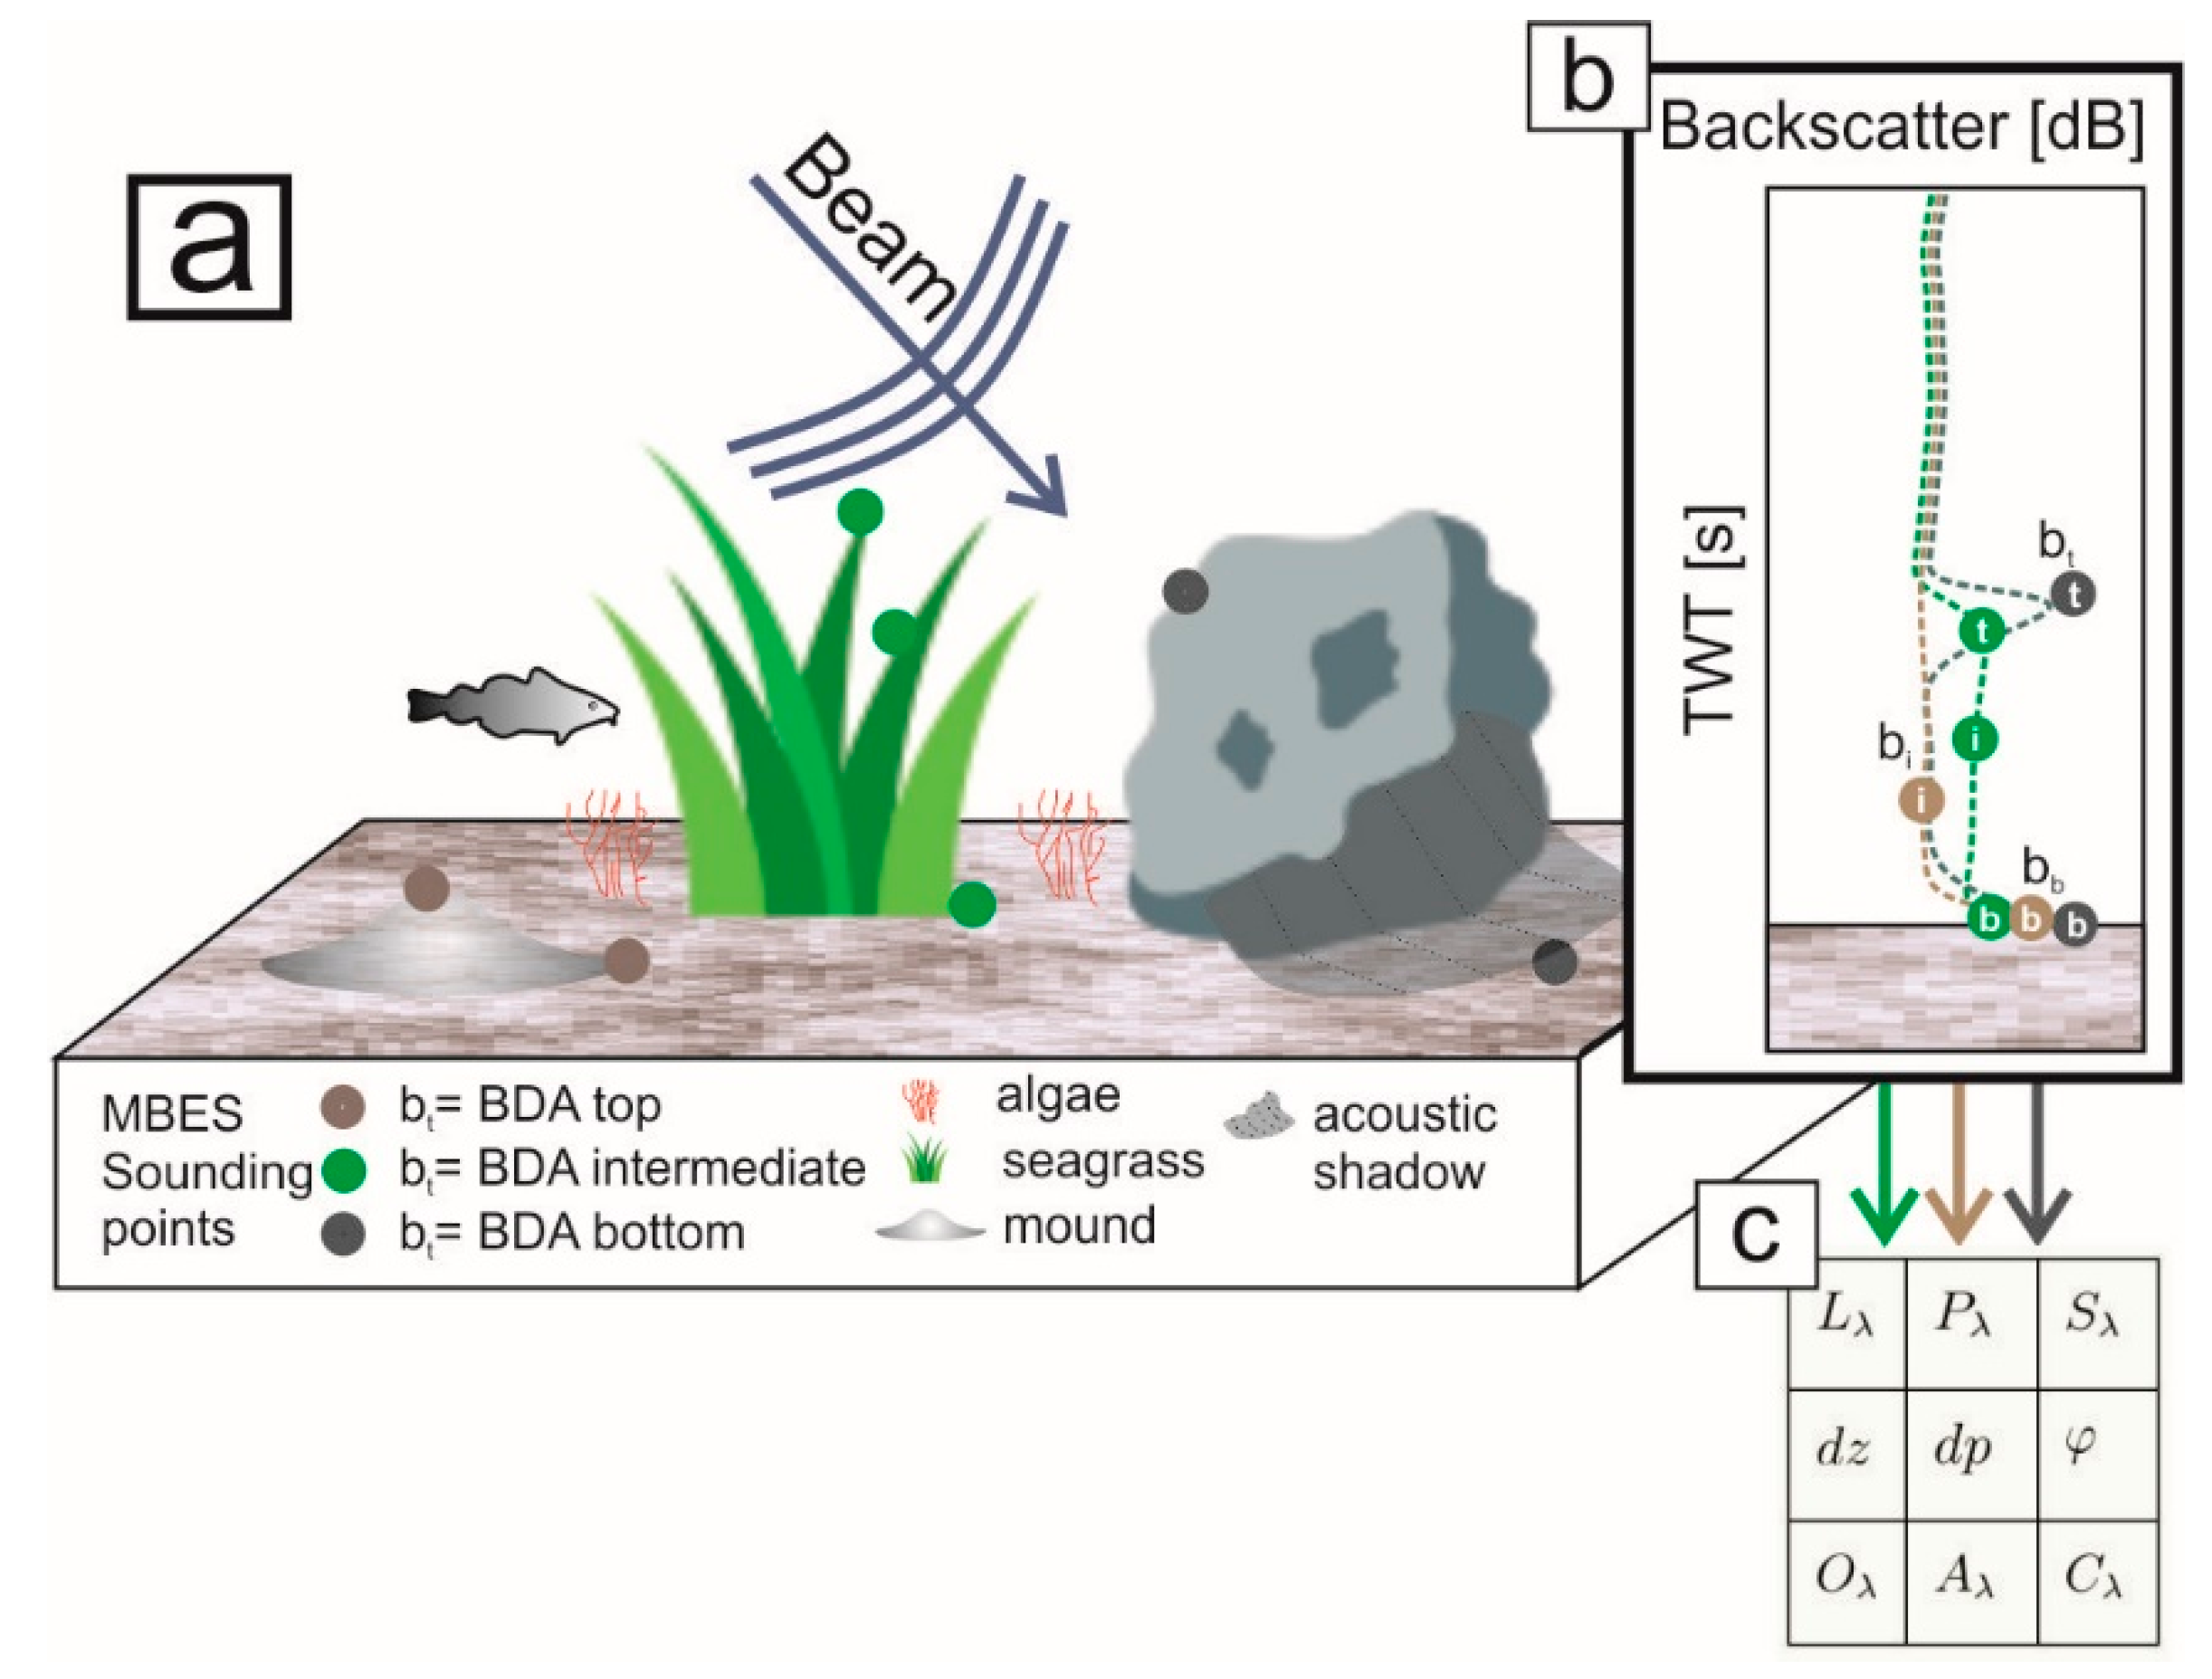 Geosciences | Free Full-Text | New Feature Classes for Acoustic Habitat  Mapping—A Multibeam Echosounder Point Cloud Analysis for Mapping Submerged  Aquatic Vegetation (SAV) | HTML